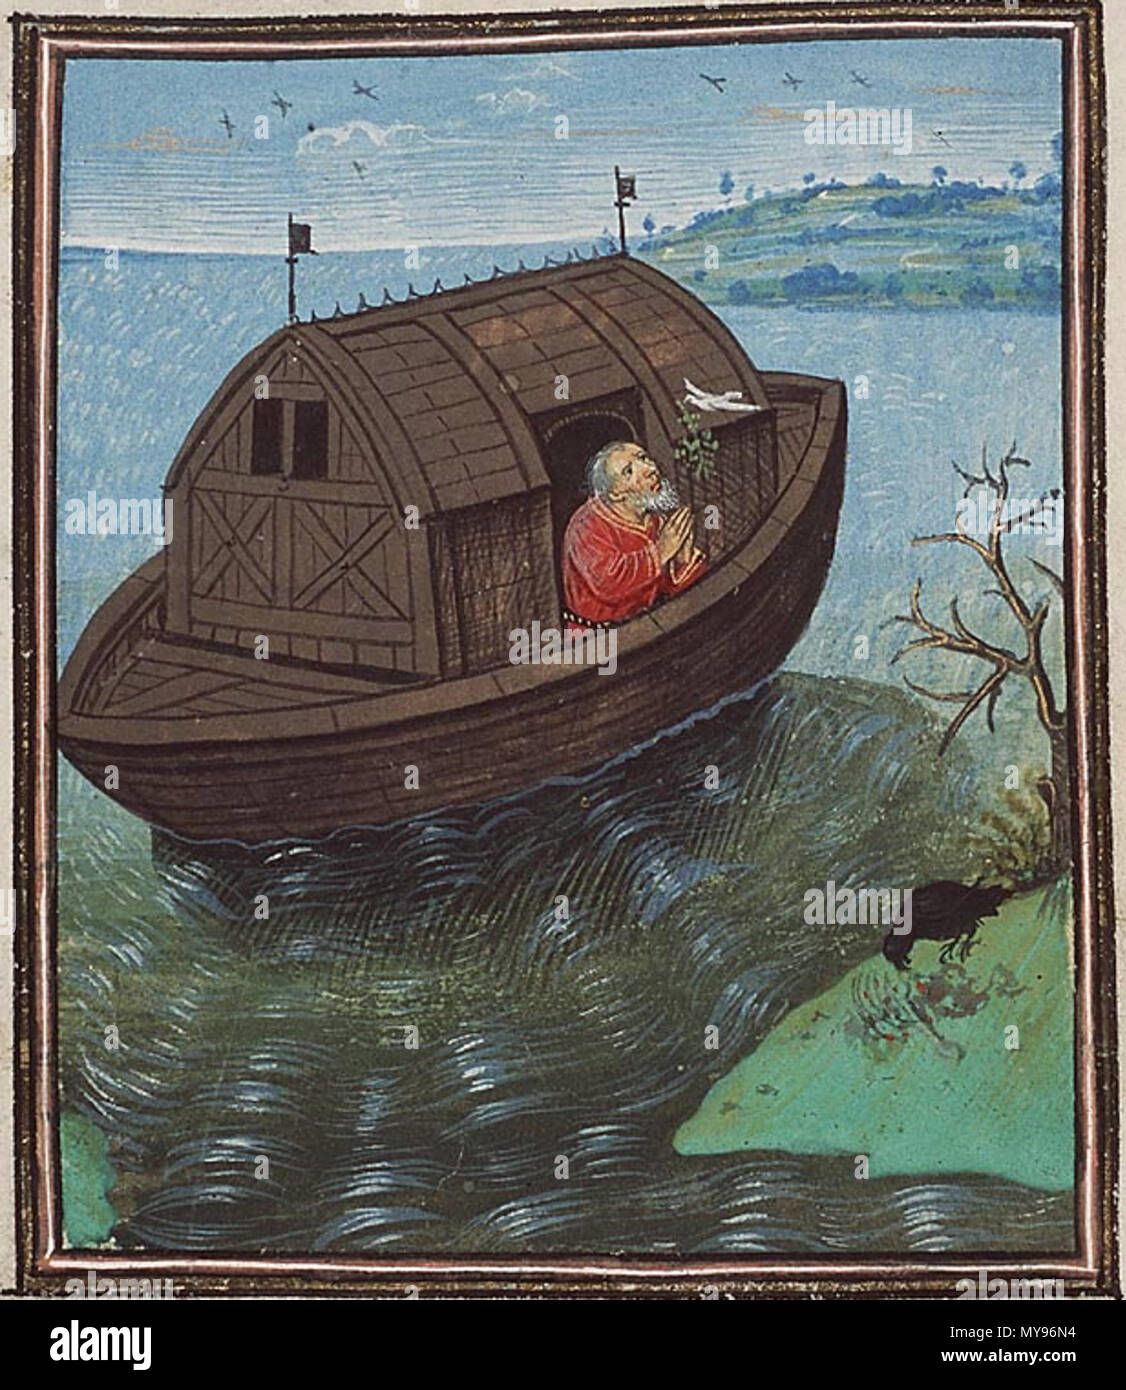 . English: Noah sends off a dove from the ark. Technique: Miniature on vellum Location: Museum Meermanno Westreenianum, The Hague Notes: From Aegidius of Roya's 'Compendium historiae universalis' of Southern Netherlands (manuscript 'Den Haag, MMW, 10 A 21') . between circa 1450 and circa 1460. DREUX, Jean; MASTER of Margaret of York; HENNECART, Jean 24 Aegidius of Roya deluge Stock Photo